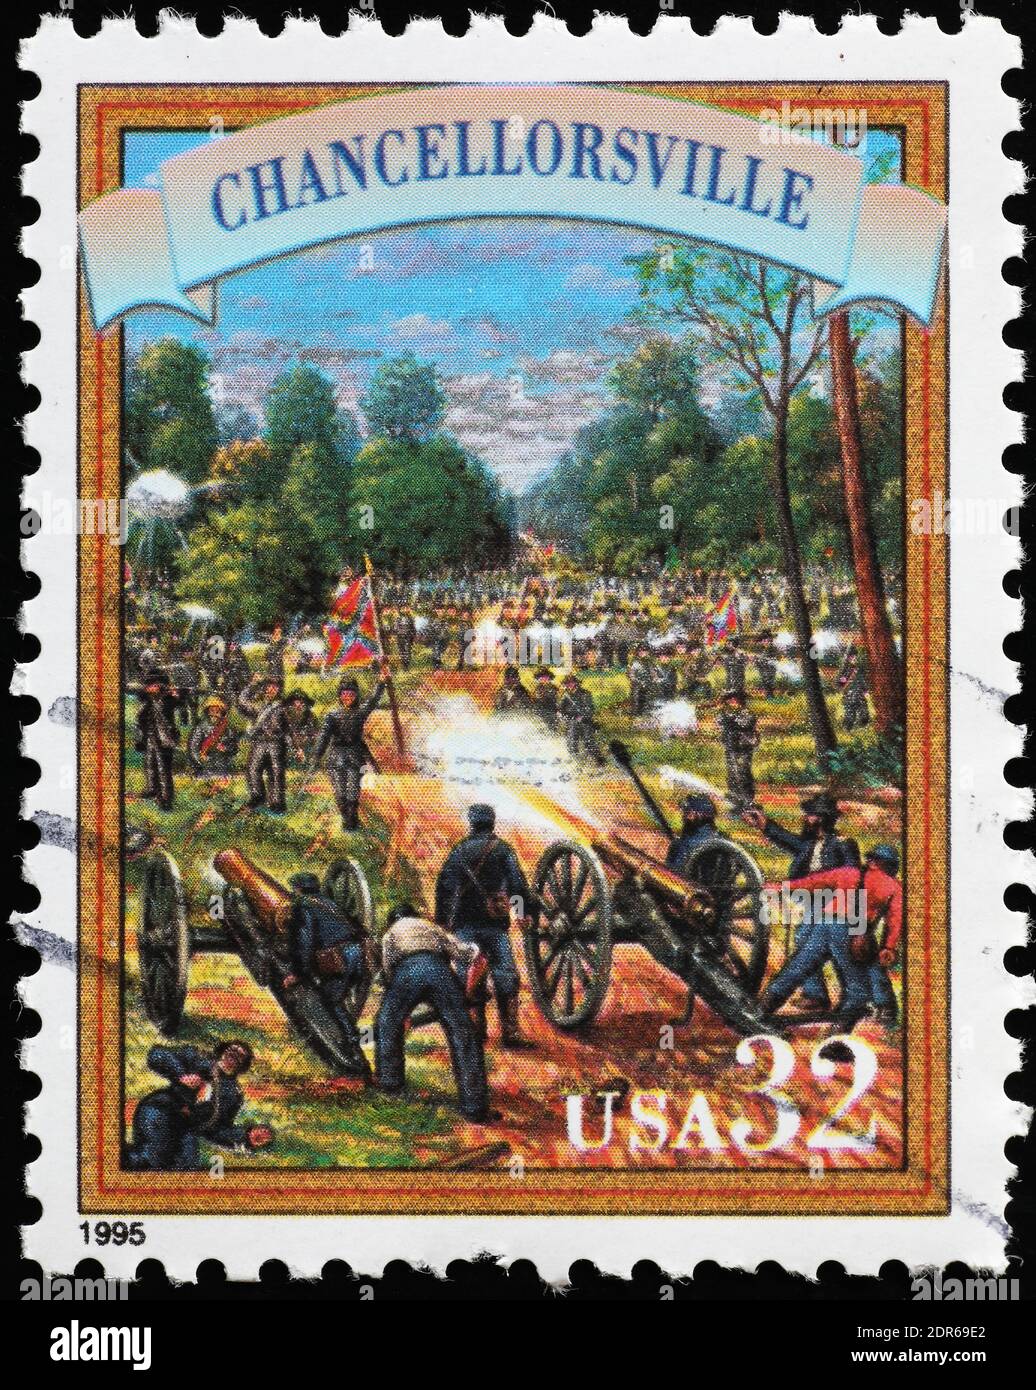 Battle of Chancellorsville on american postage stamp Stock Photo